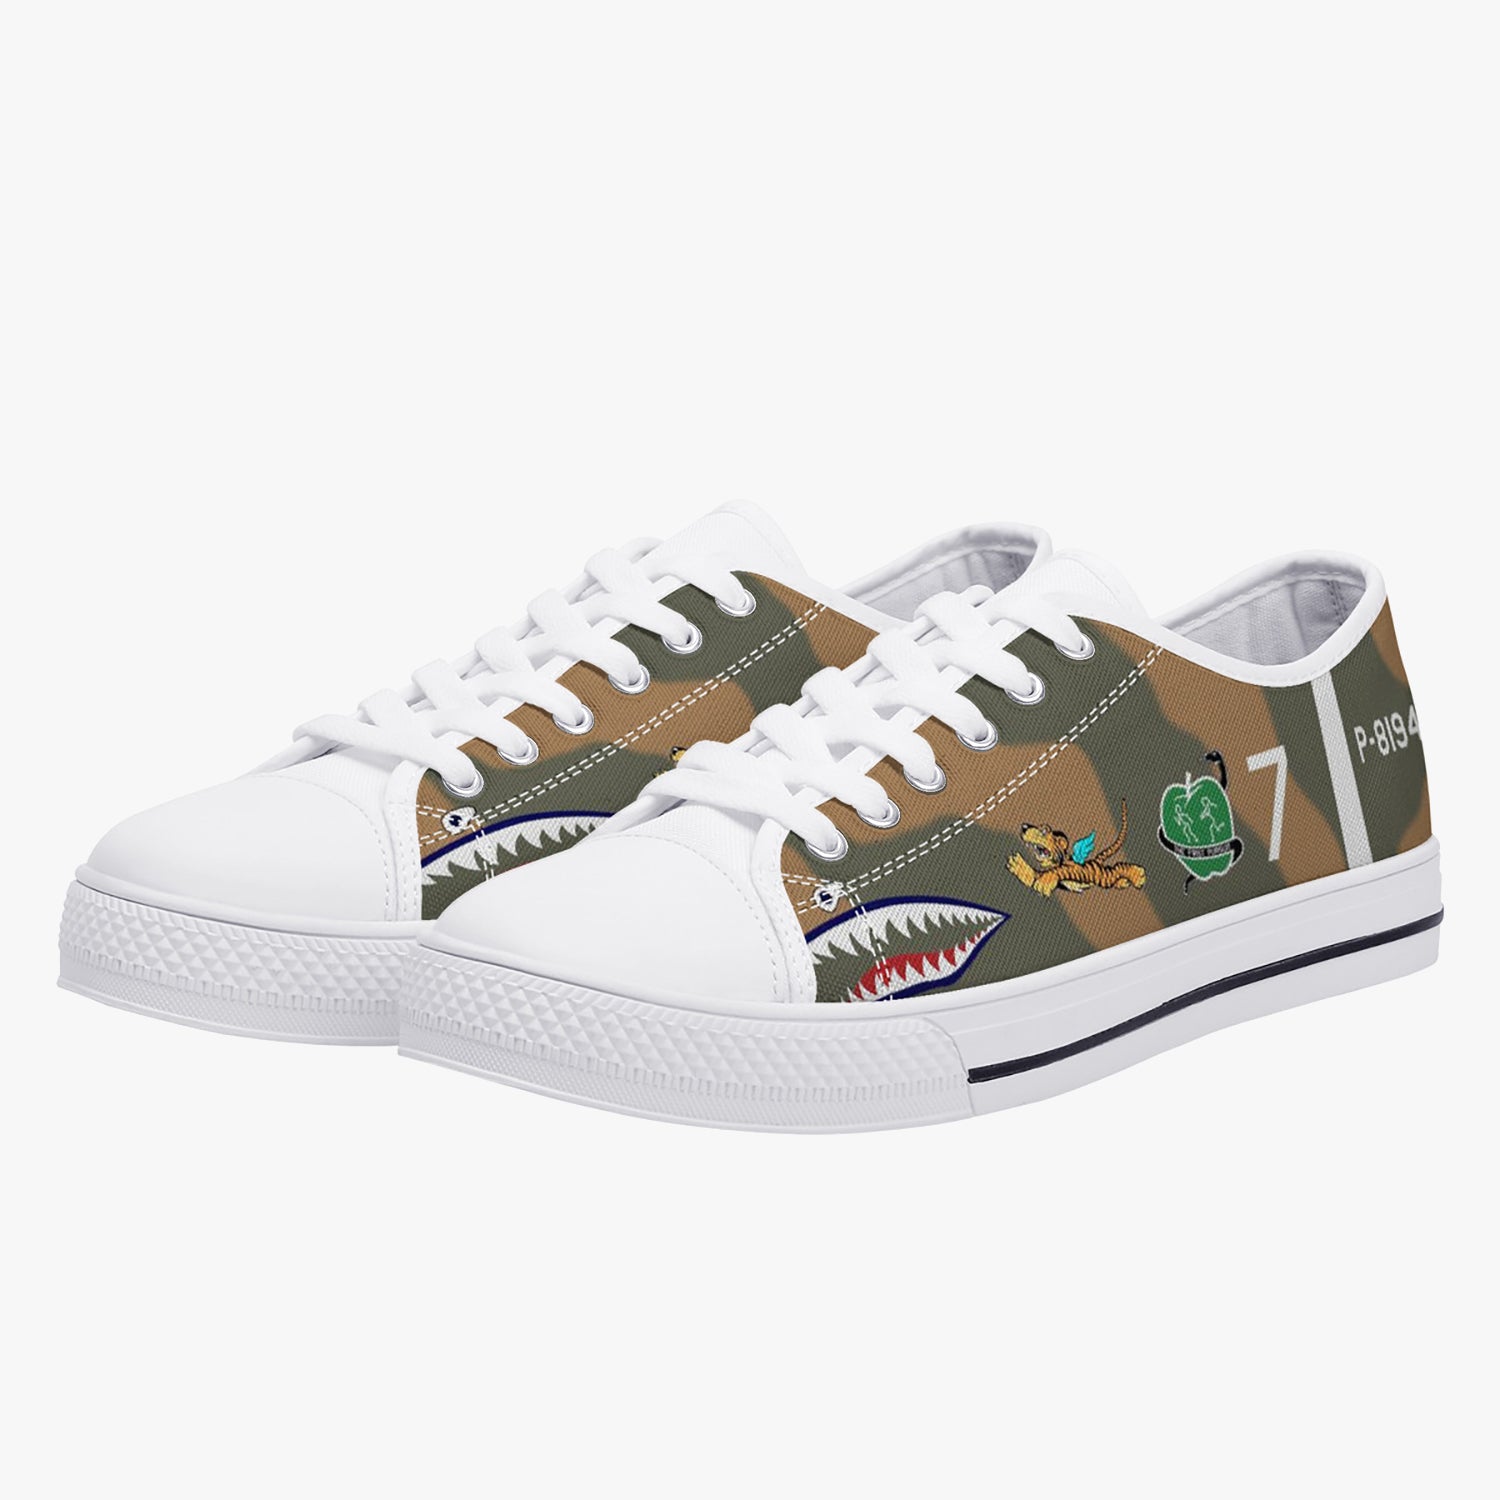 P-40 "White #7" of Robert Neale Low Top Canvas Shoes - I Love a Hangar